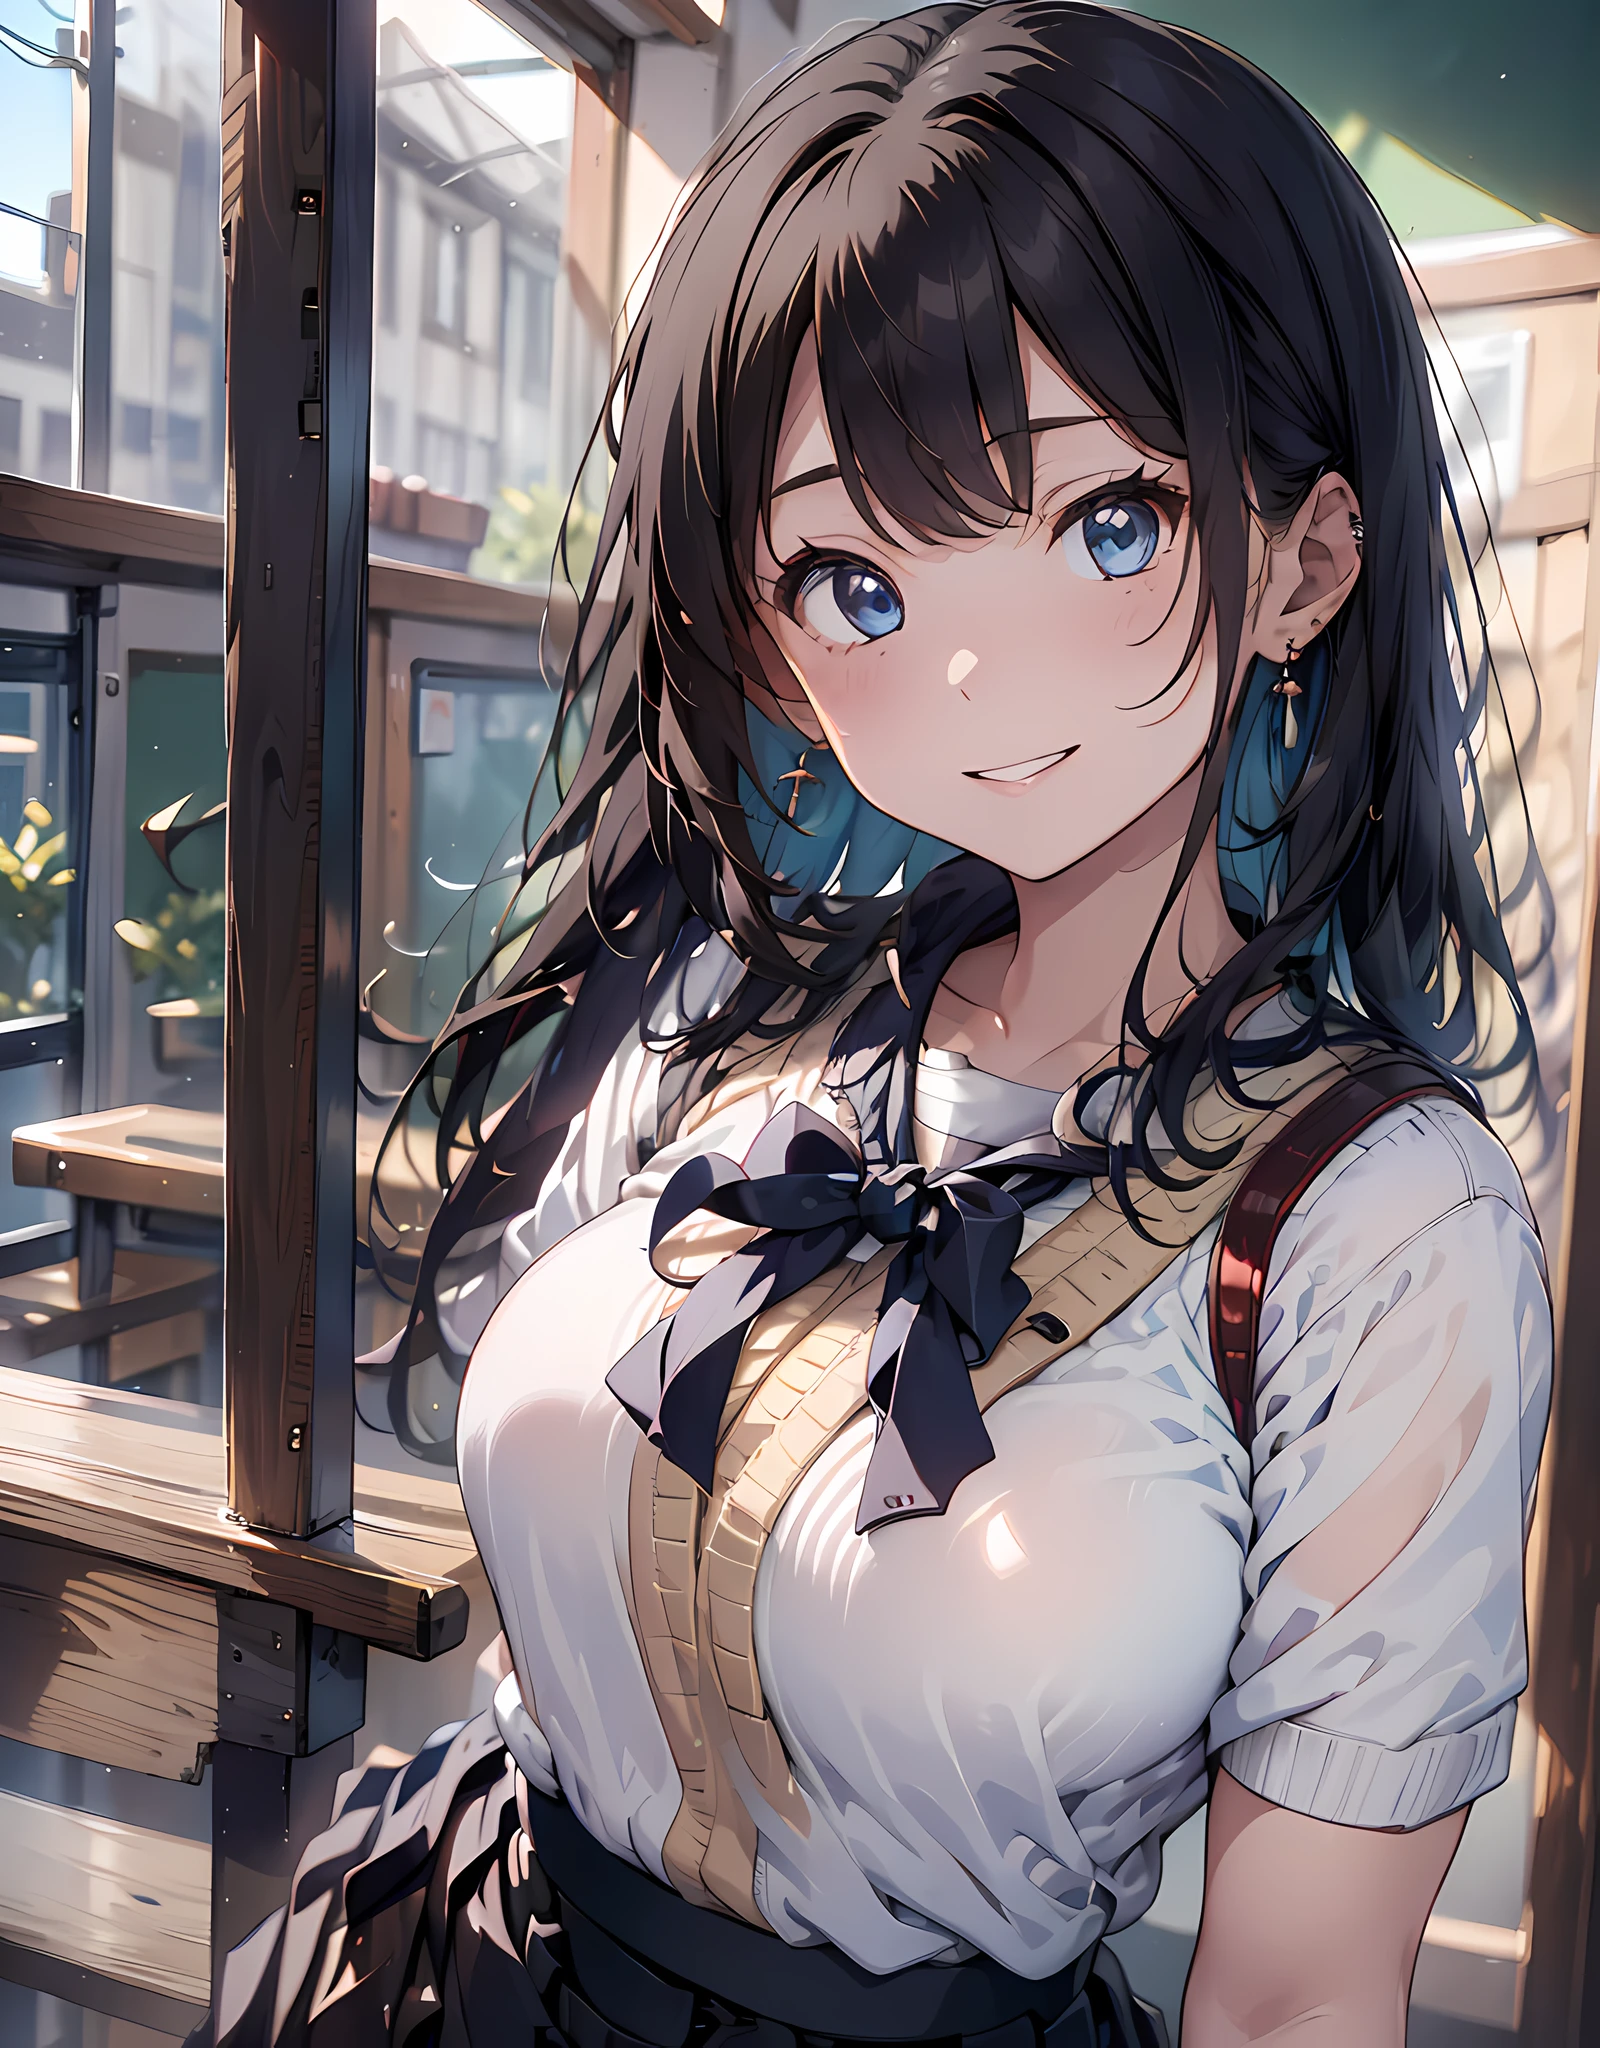 (masterpiece, best quality:1.37), highres, ultra-detailed, ultra-sharp, BREAK, Japanese school girl, 1girl, (black hair, medium straight hair, bangs), blue eyes, jewelry, earrings, piercing, BREAK, ((detailed jumper skirt uniform:1.5), (((jumper skirt:1.5))), pinafore dress, lovely look), grin, light smile, parted lips, pink lipstick, BREAK, standing, cowboy shot, arms behind back, arms behind on hip, detailed human hands, HDTV:1.2, ((detailed school room background:1.3)), 8 life size, slender, anime style, anime style school girl, perfect anatomy, perfect proportion, inspiration from Kyoto animation and A-1 picture,